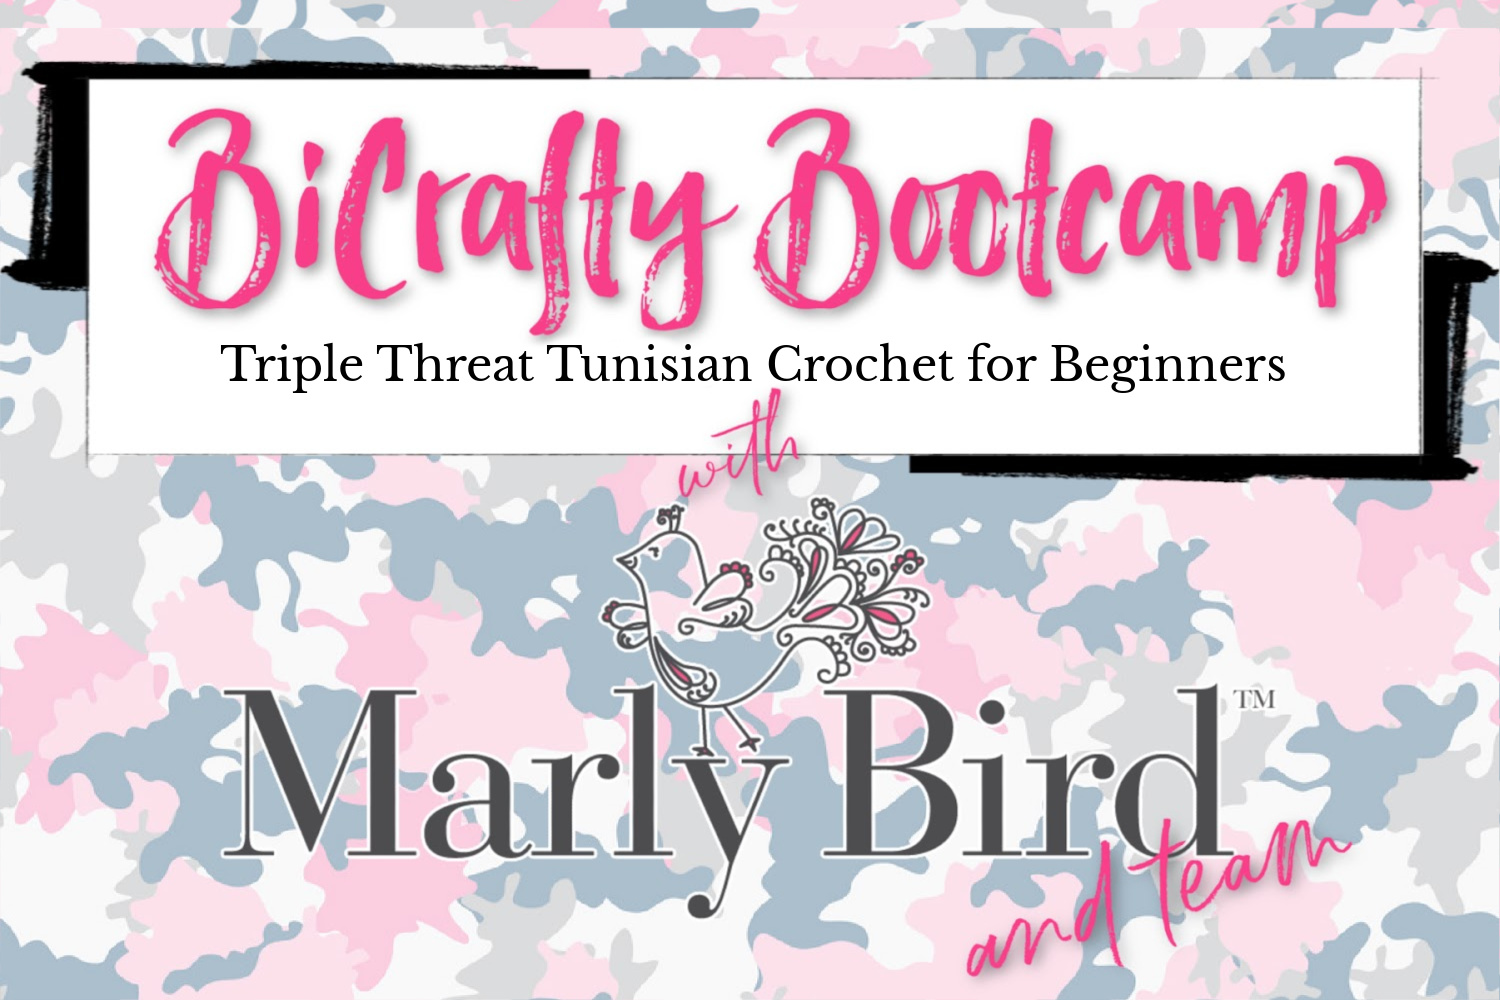 BiCrafty Bootcamp: Triple Threat Tunisian Crochet for Beginners – Lesson Two